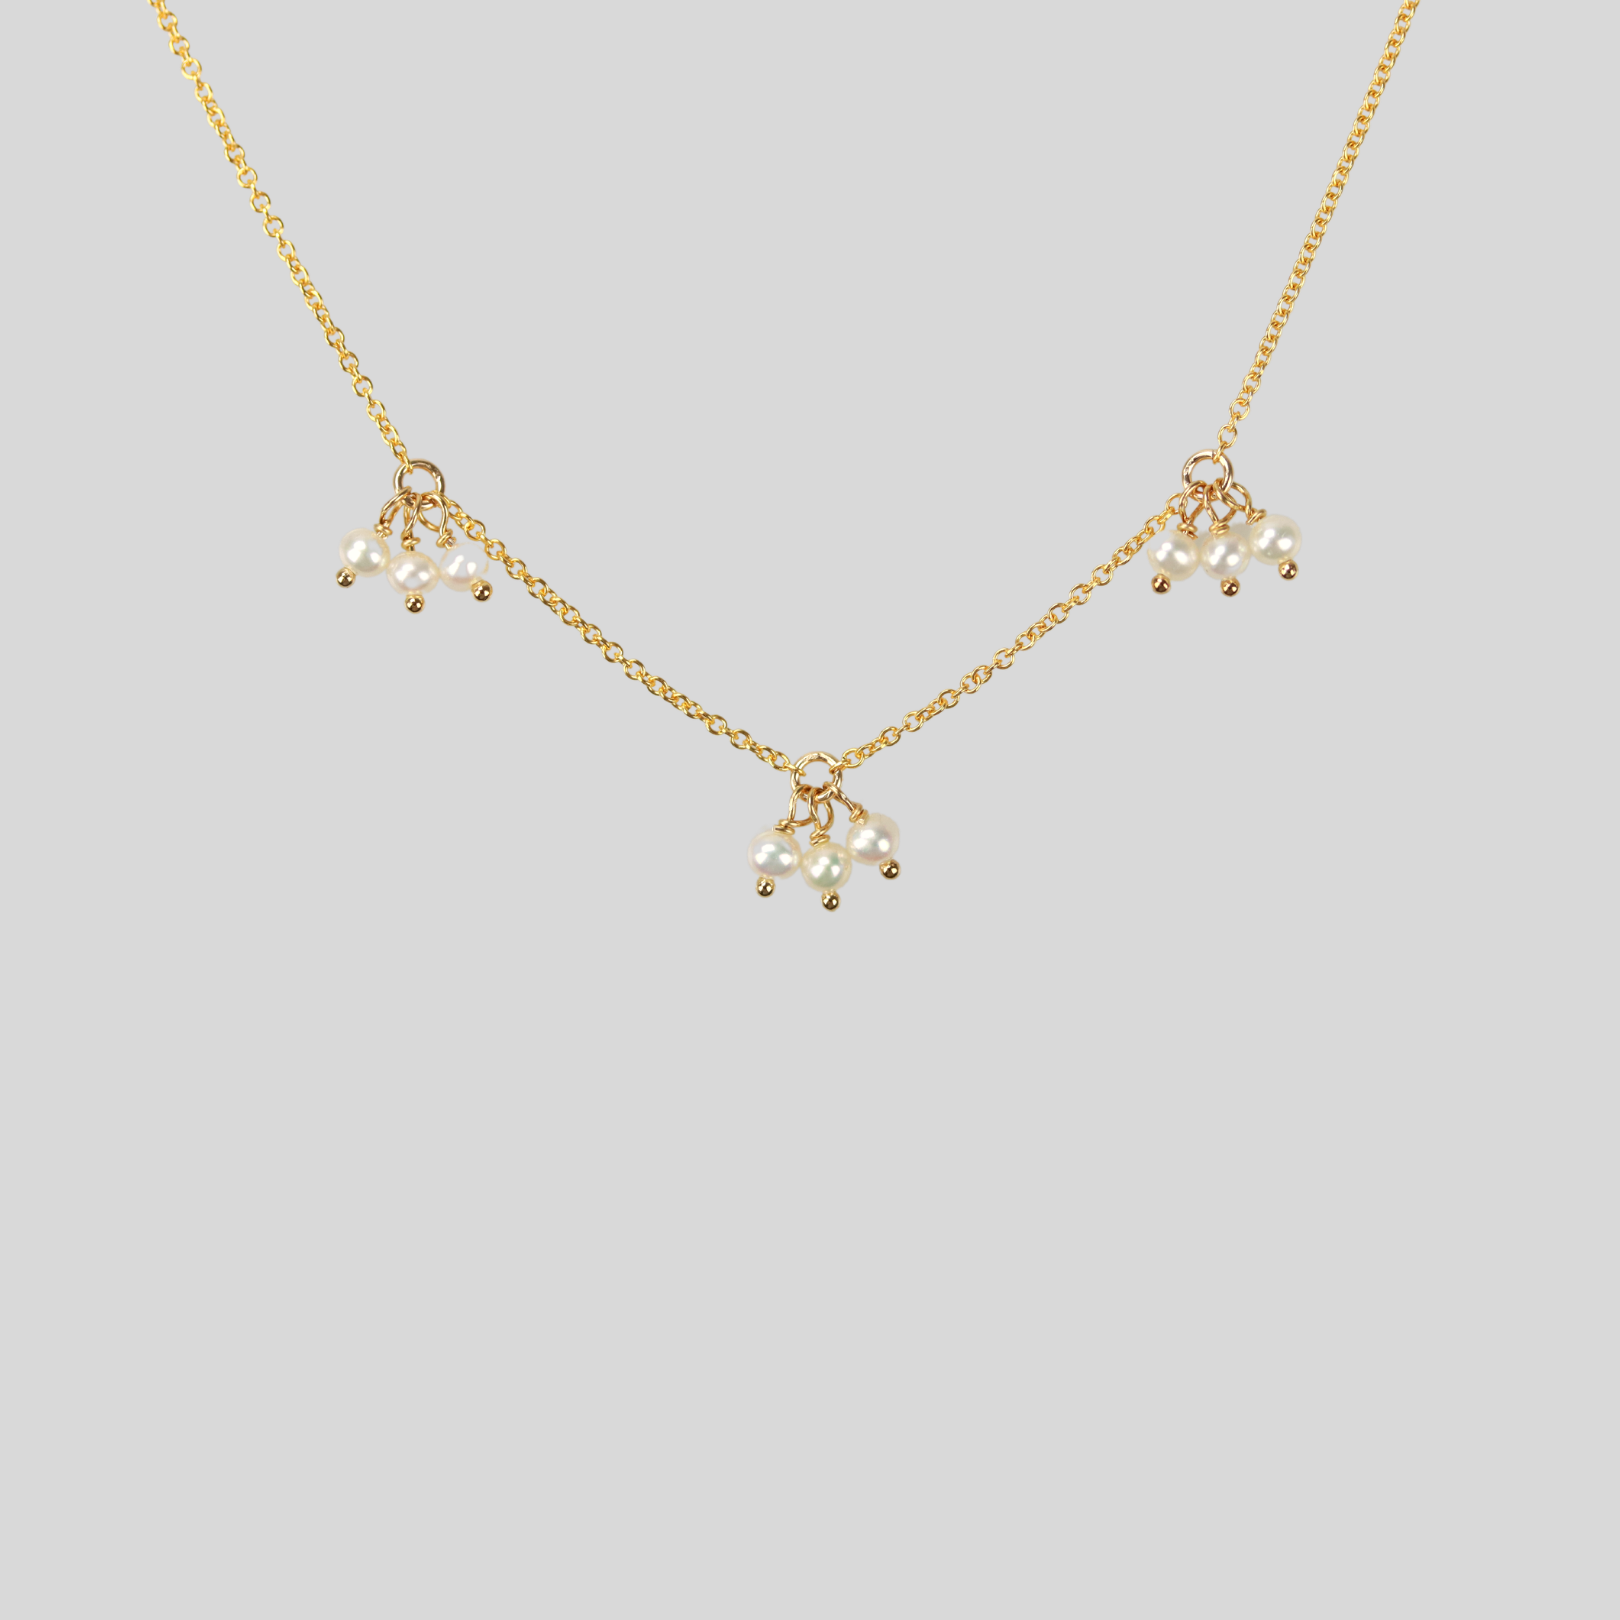 Dainty 14k Gold Filled Baby Turquoise Cluster Necklace